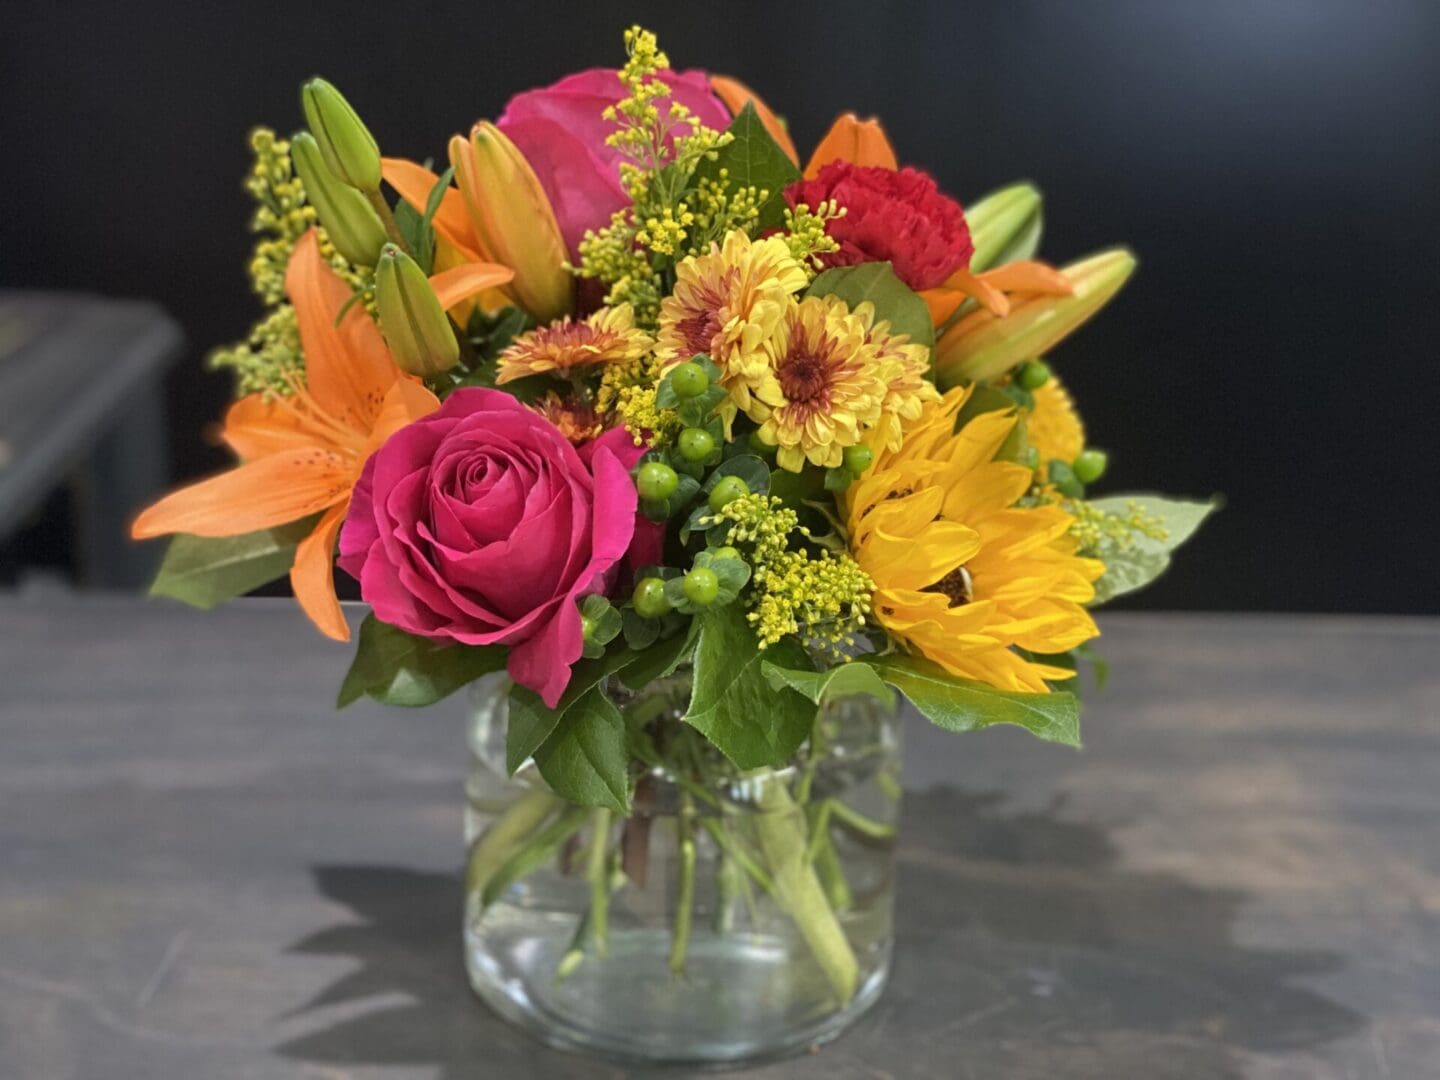 A small bouquet of pink, yellow, and orange flowers